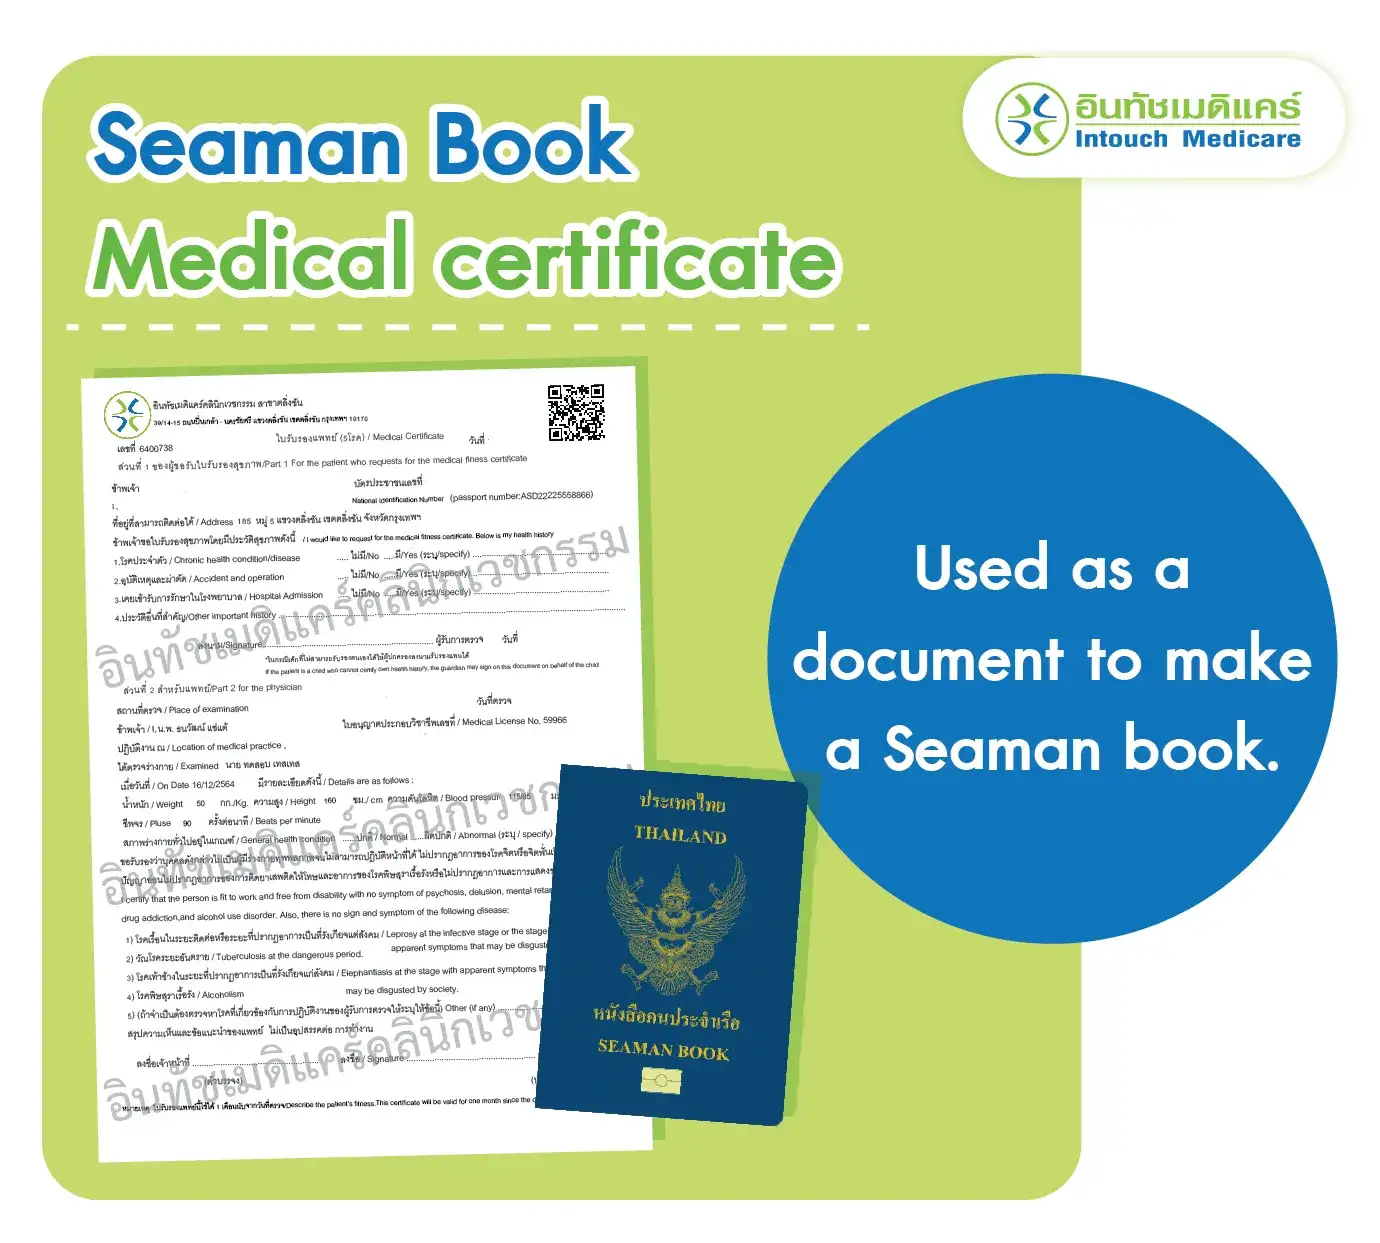 Medical certificate / seaman's book / used as a document to make a seaman book.